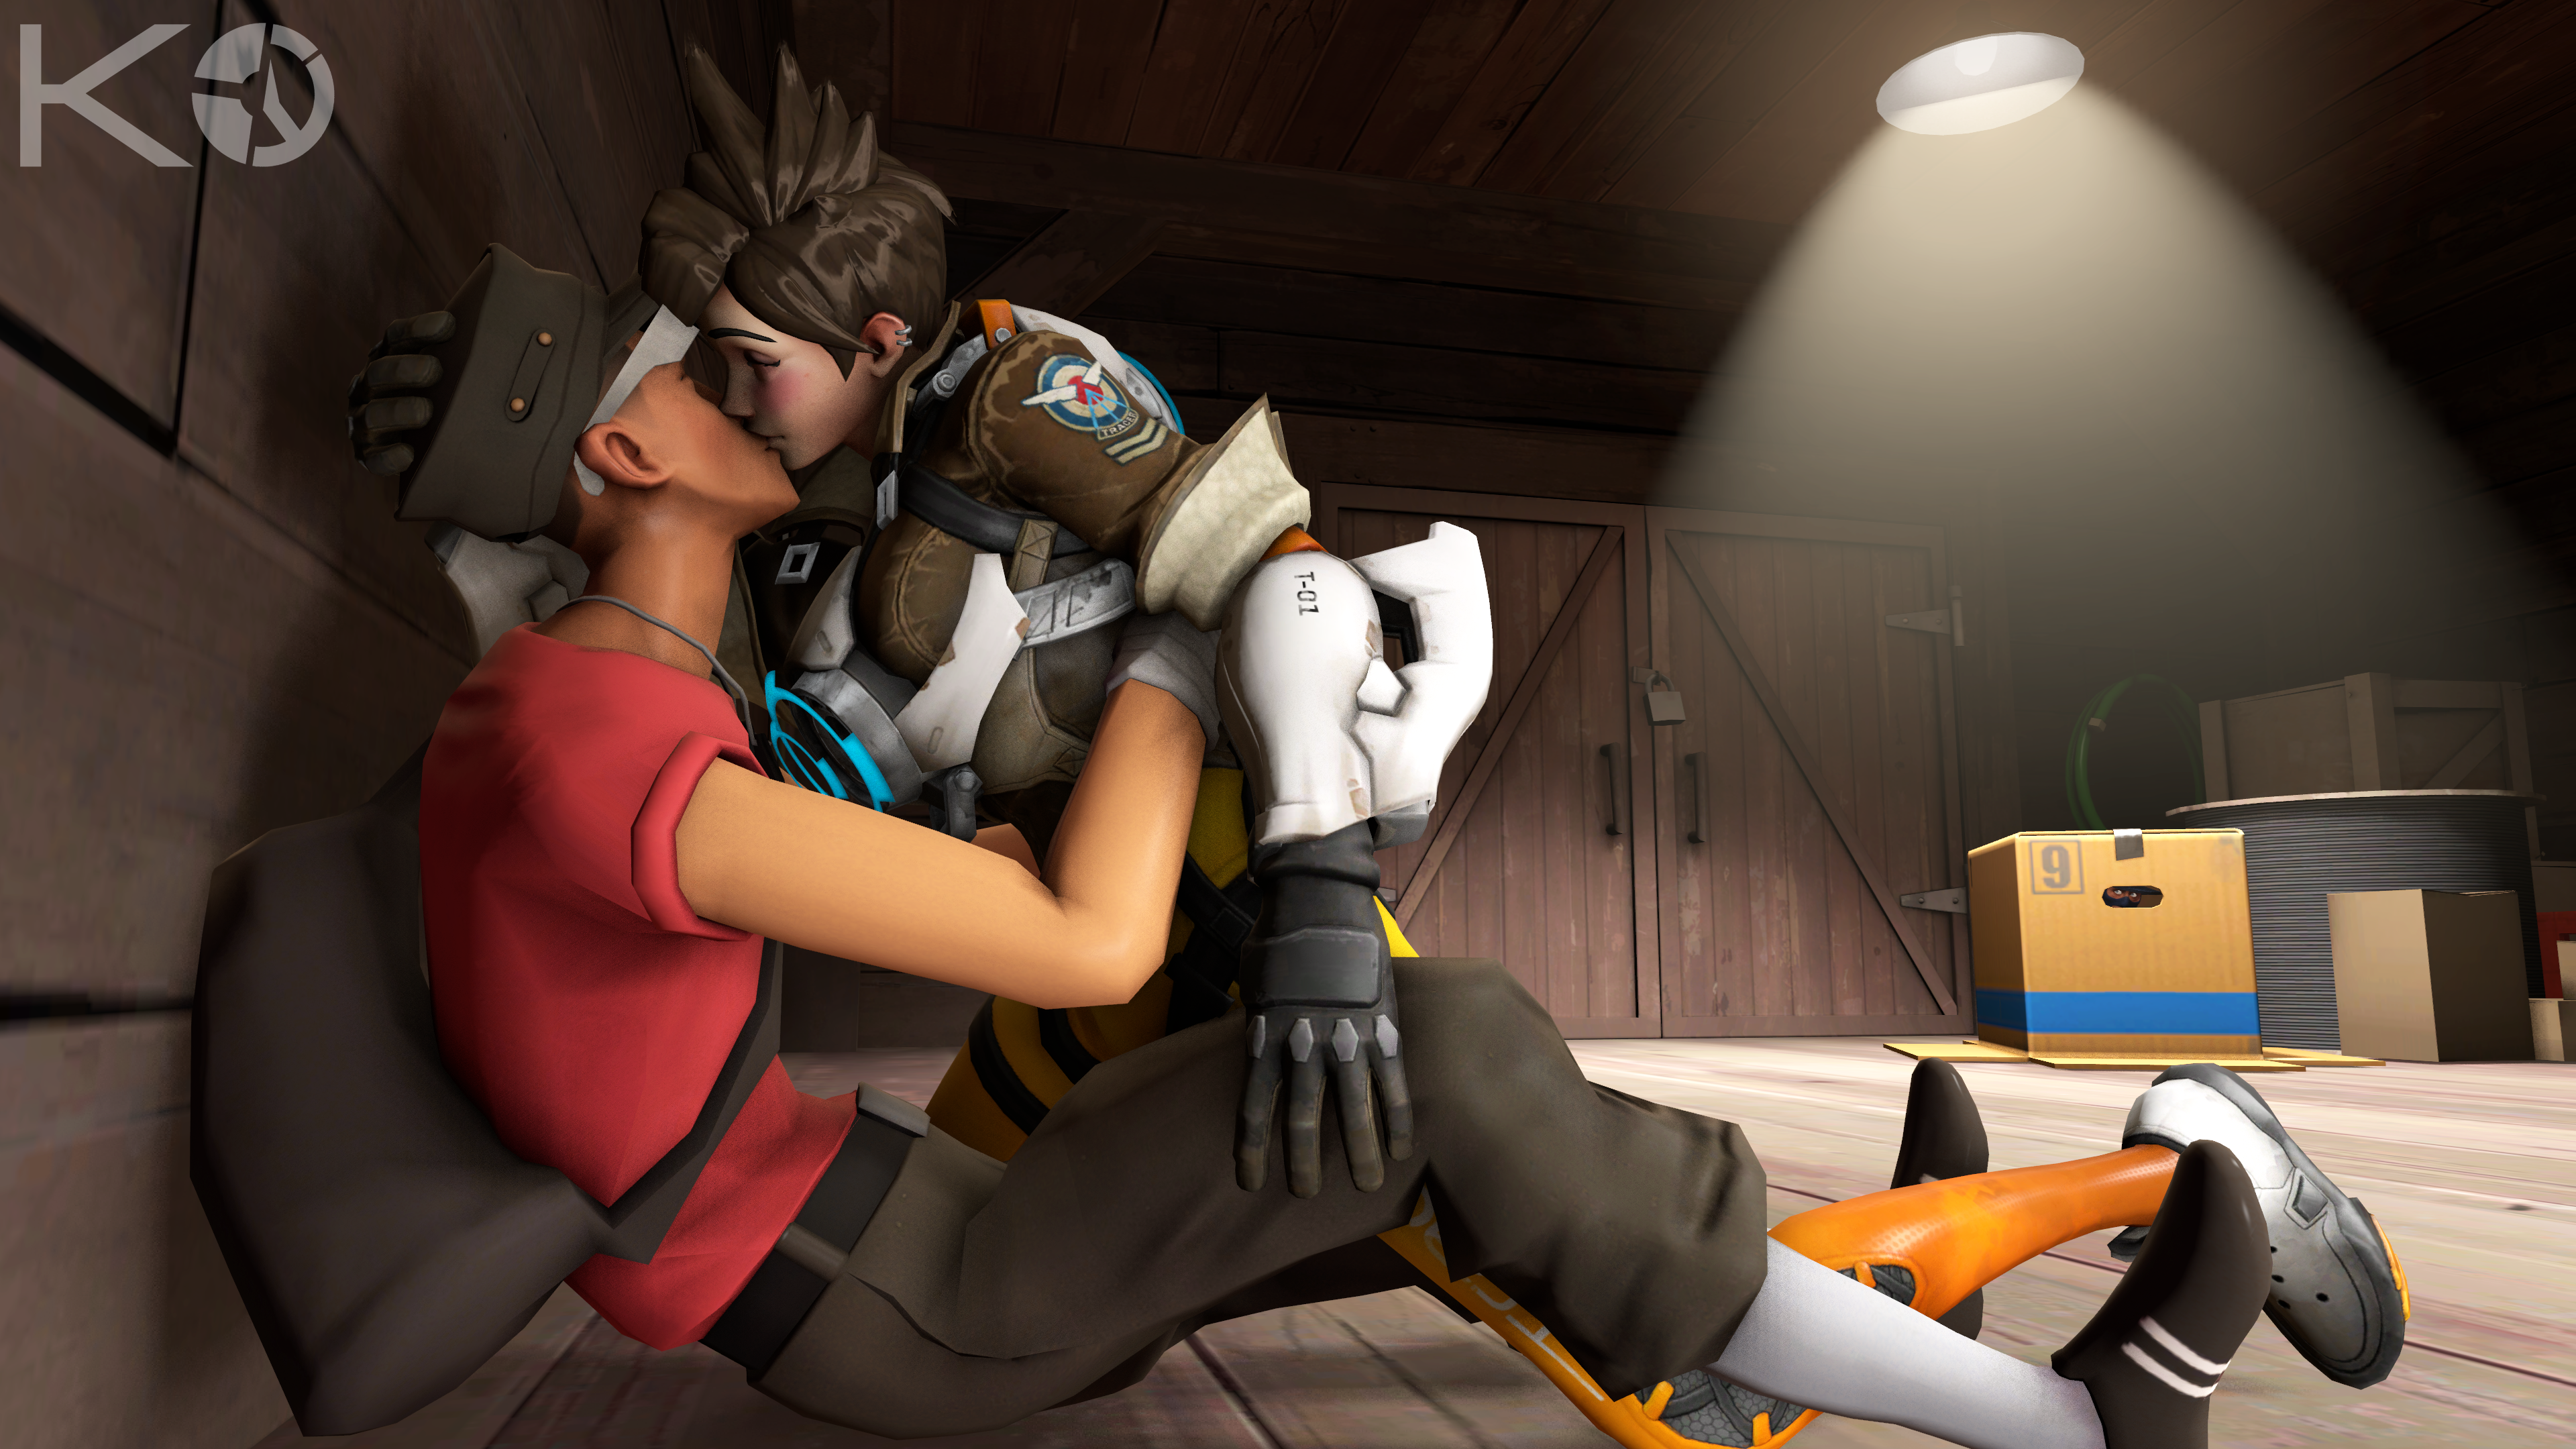 TF2/OW SFM Time To Ourselves By Kwarduk On DeviantArt 